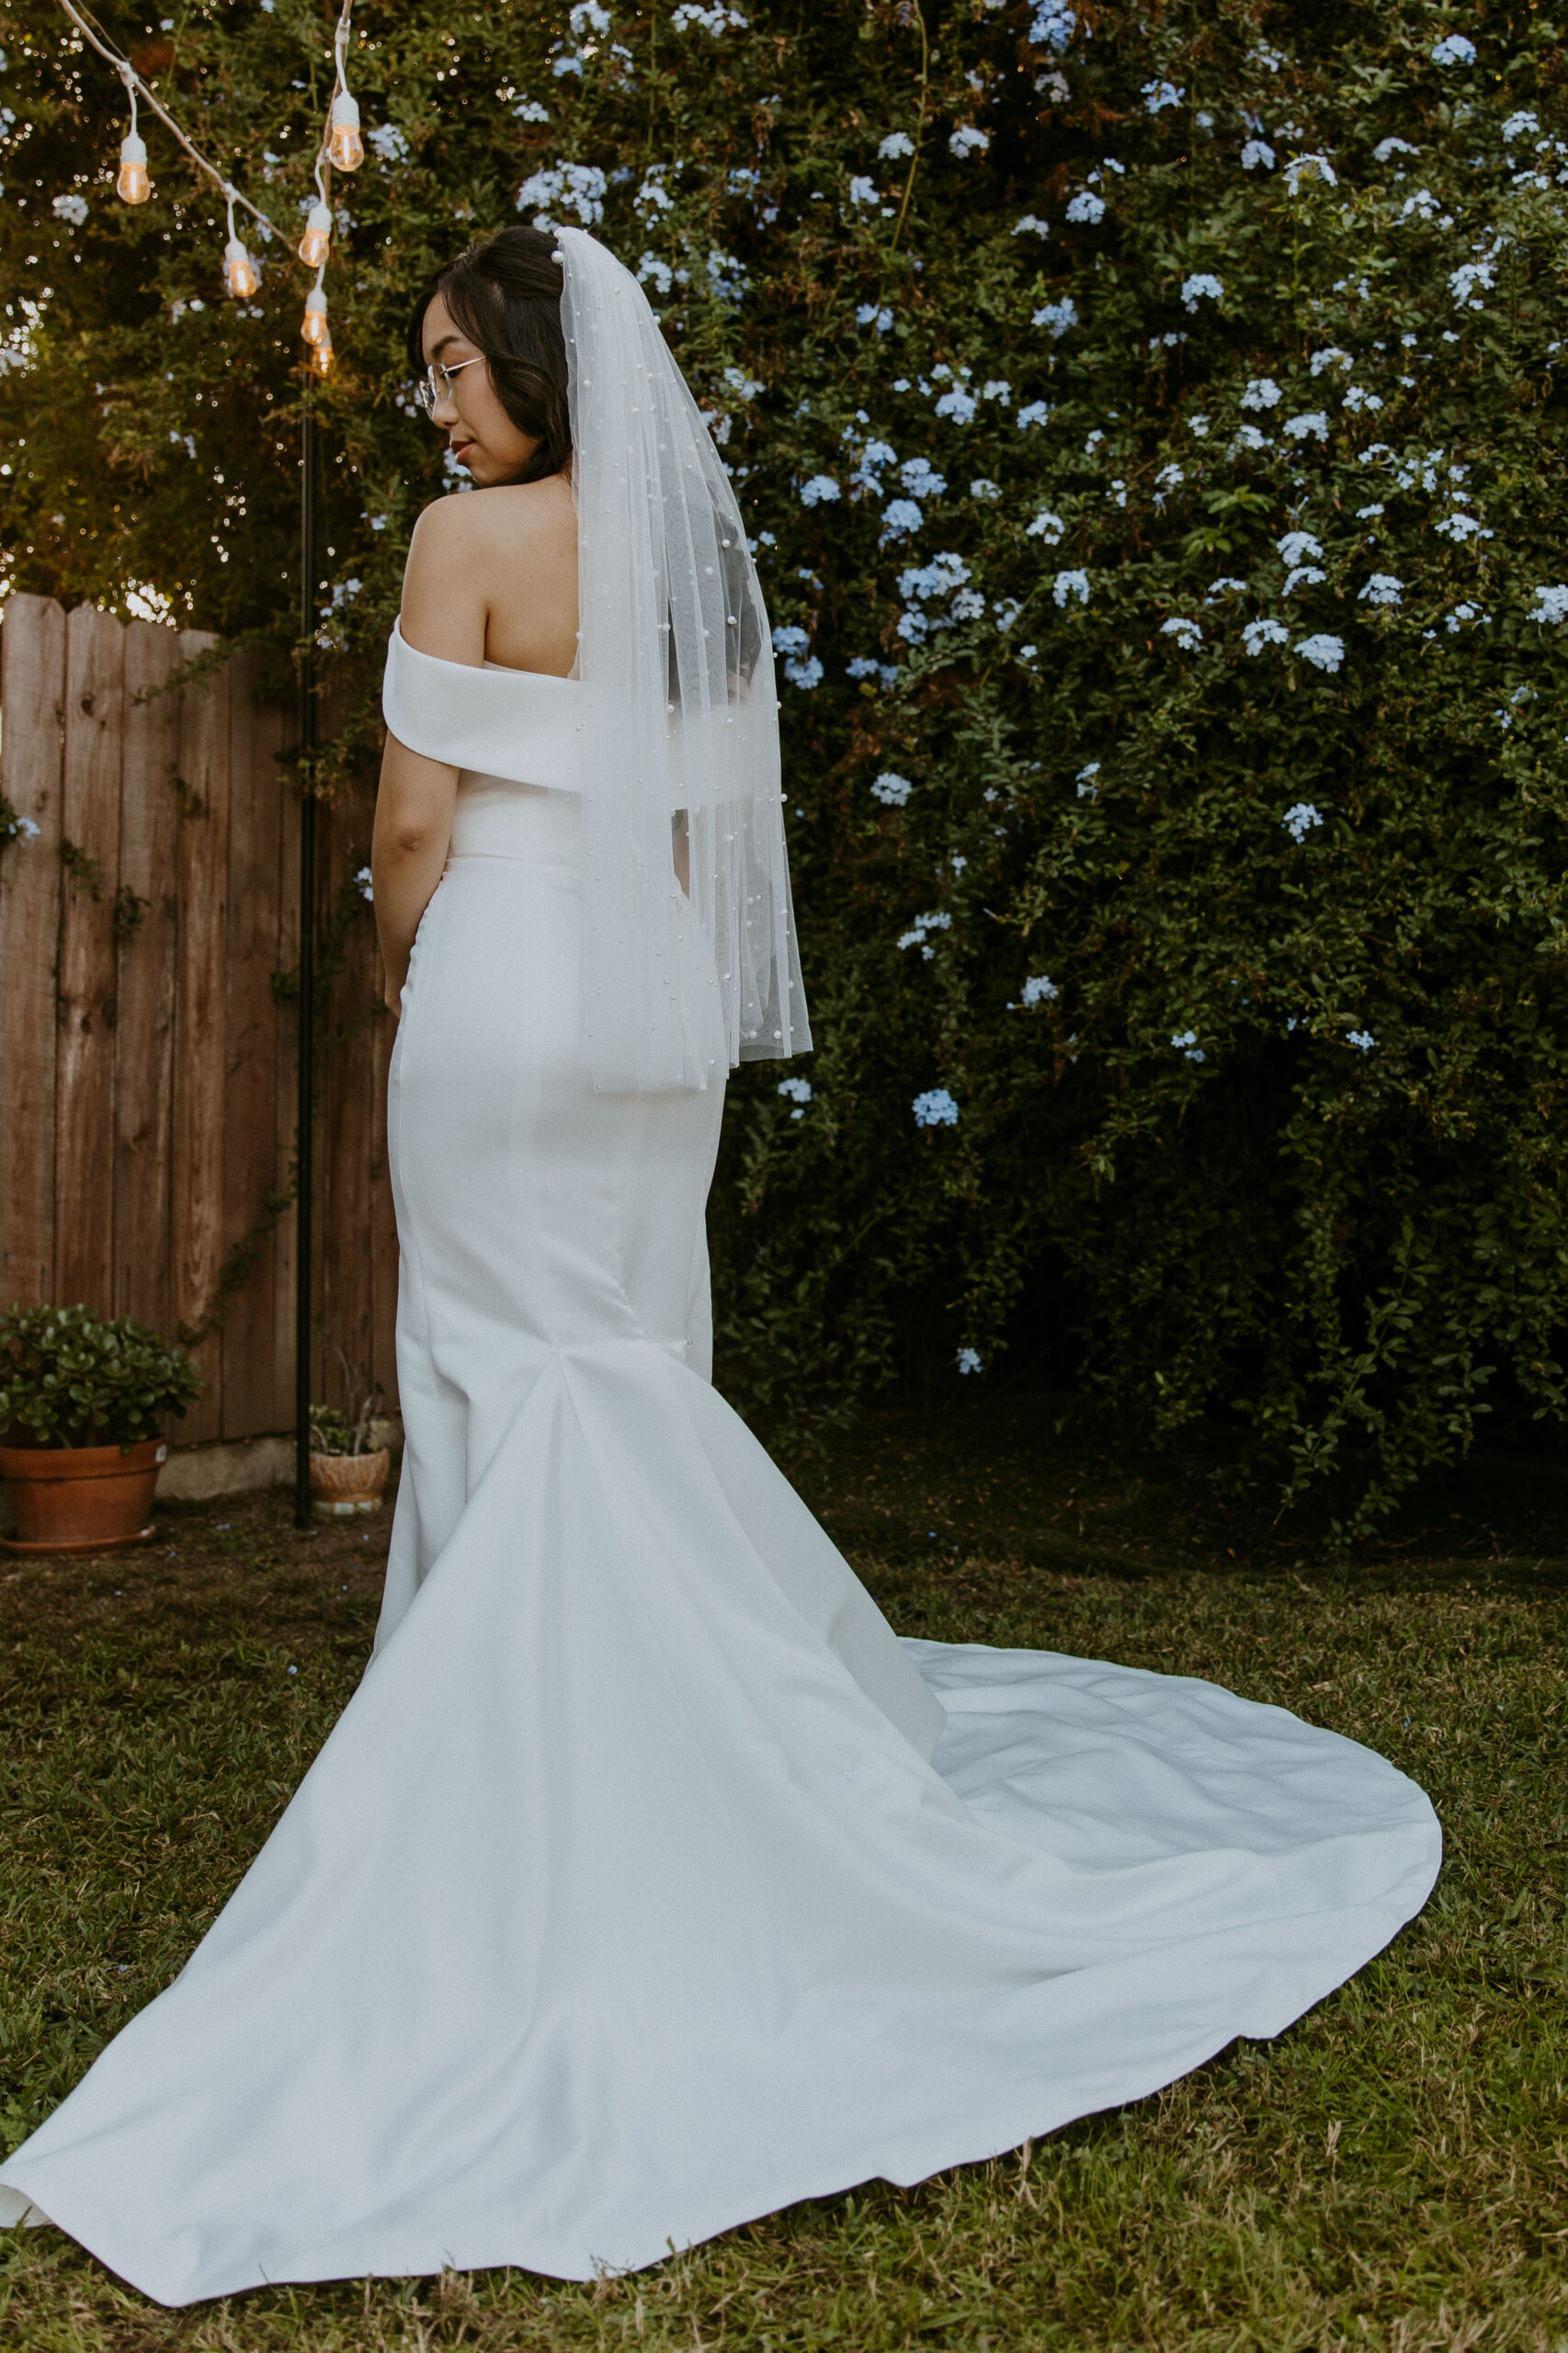 Bride in an elegant off-shoulder gown with a veil standing in a garden setting.